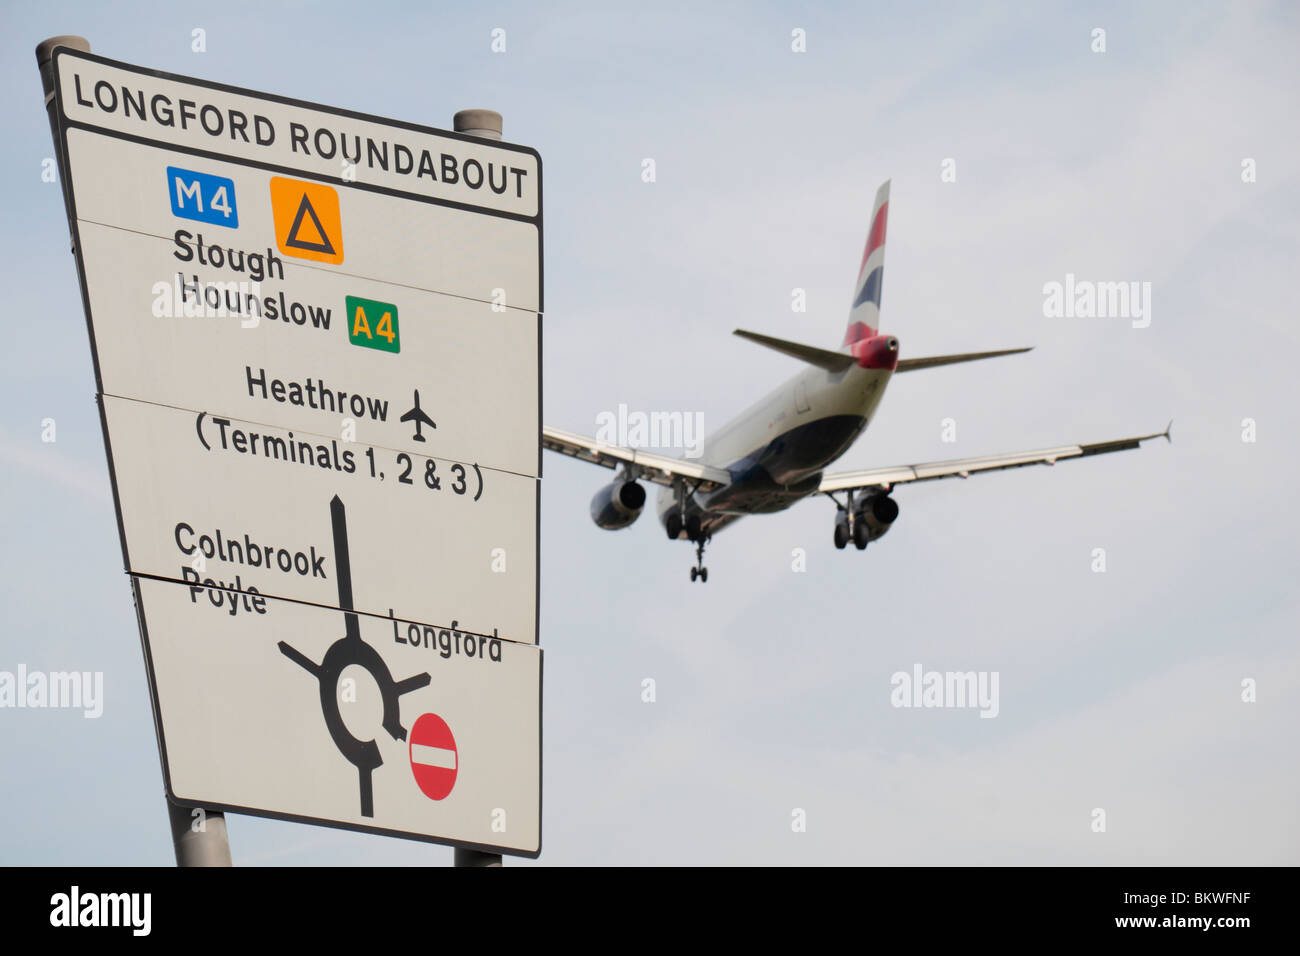 A British Airways 747 passing a road sign while landing at Heathrow Airport, London, UK. Stock Photo